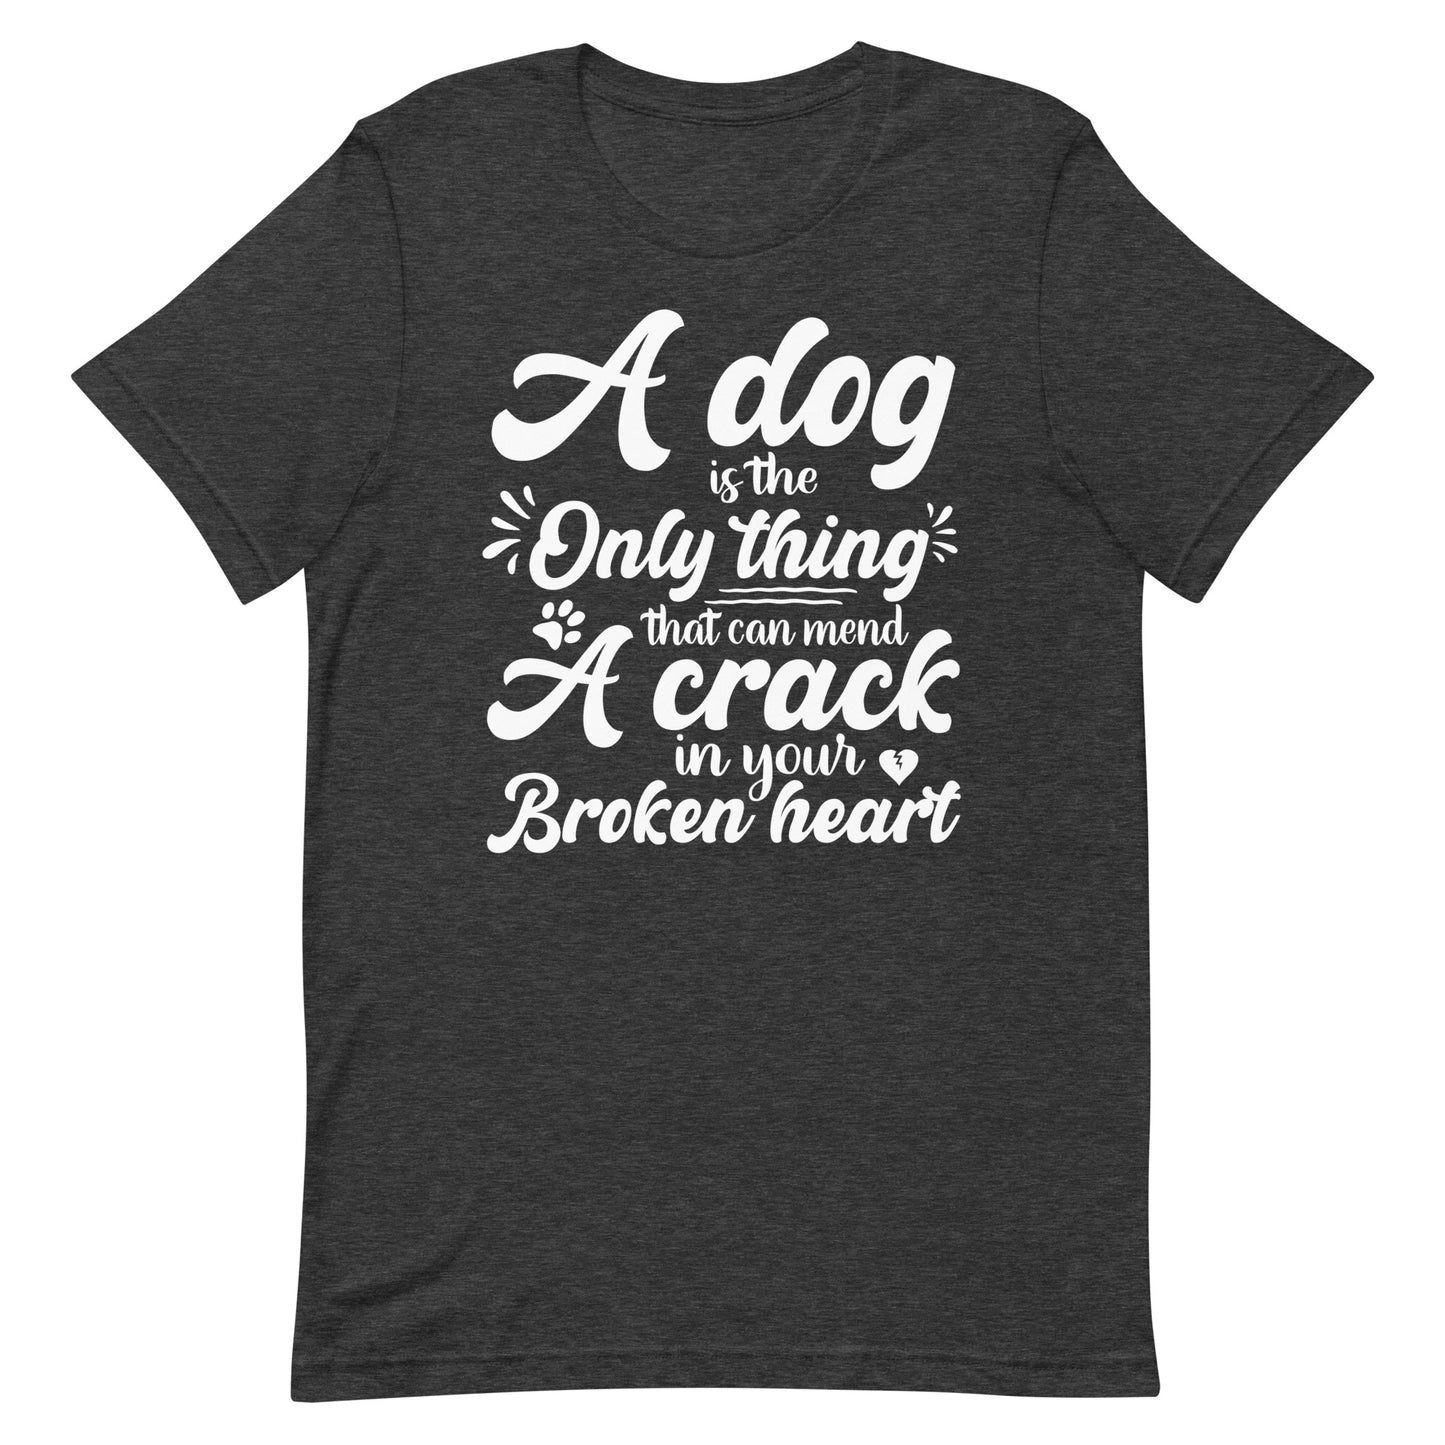 A Dog is the Only Thing that can mend a Crack in Your Broken Heart T-Shirt